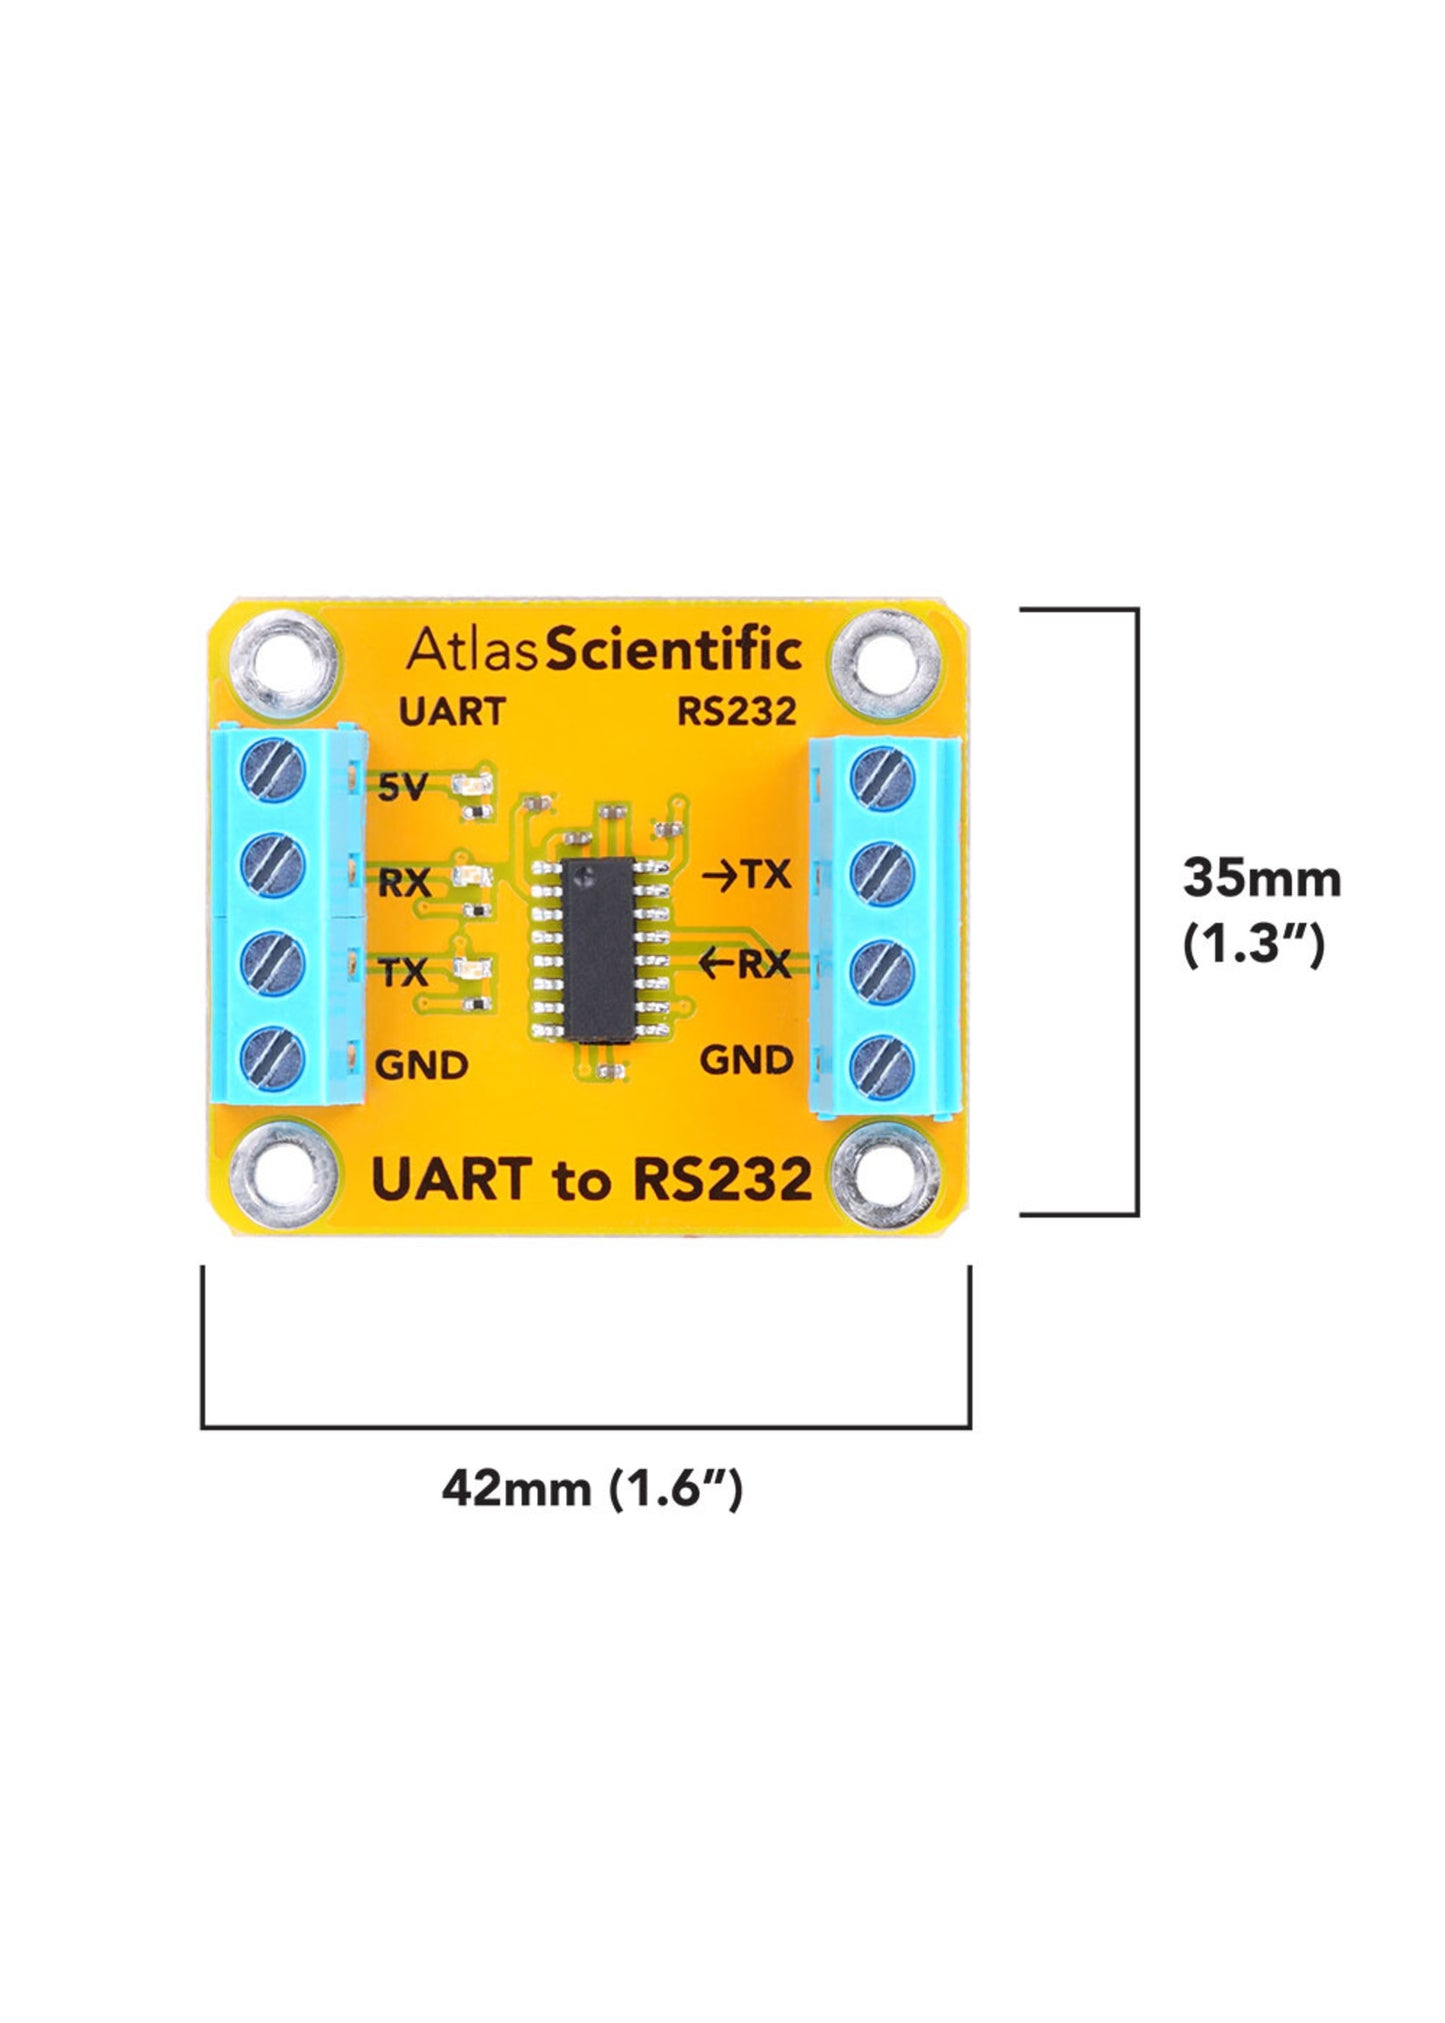 UART to RS232 Converter